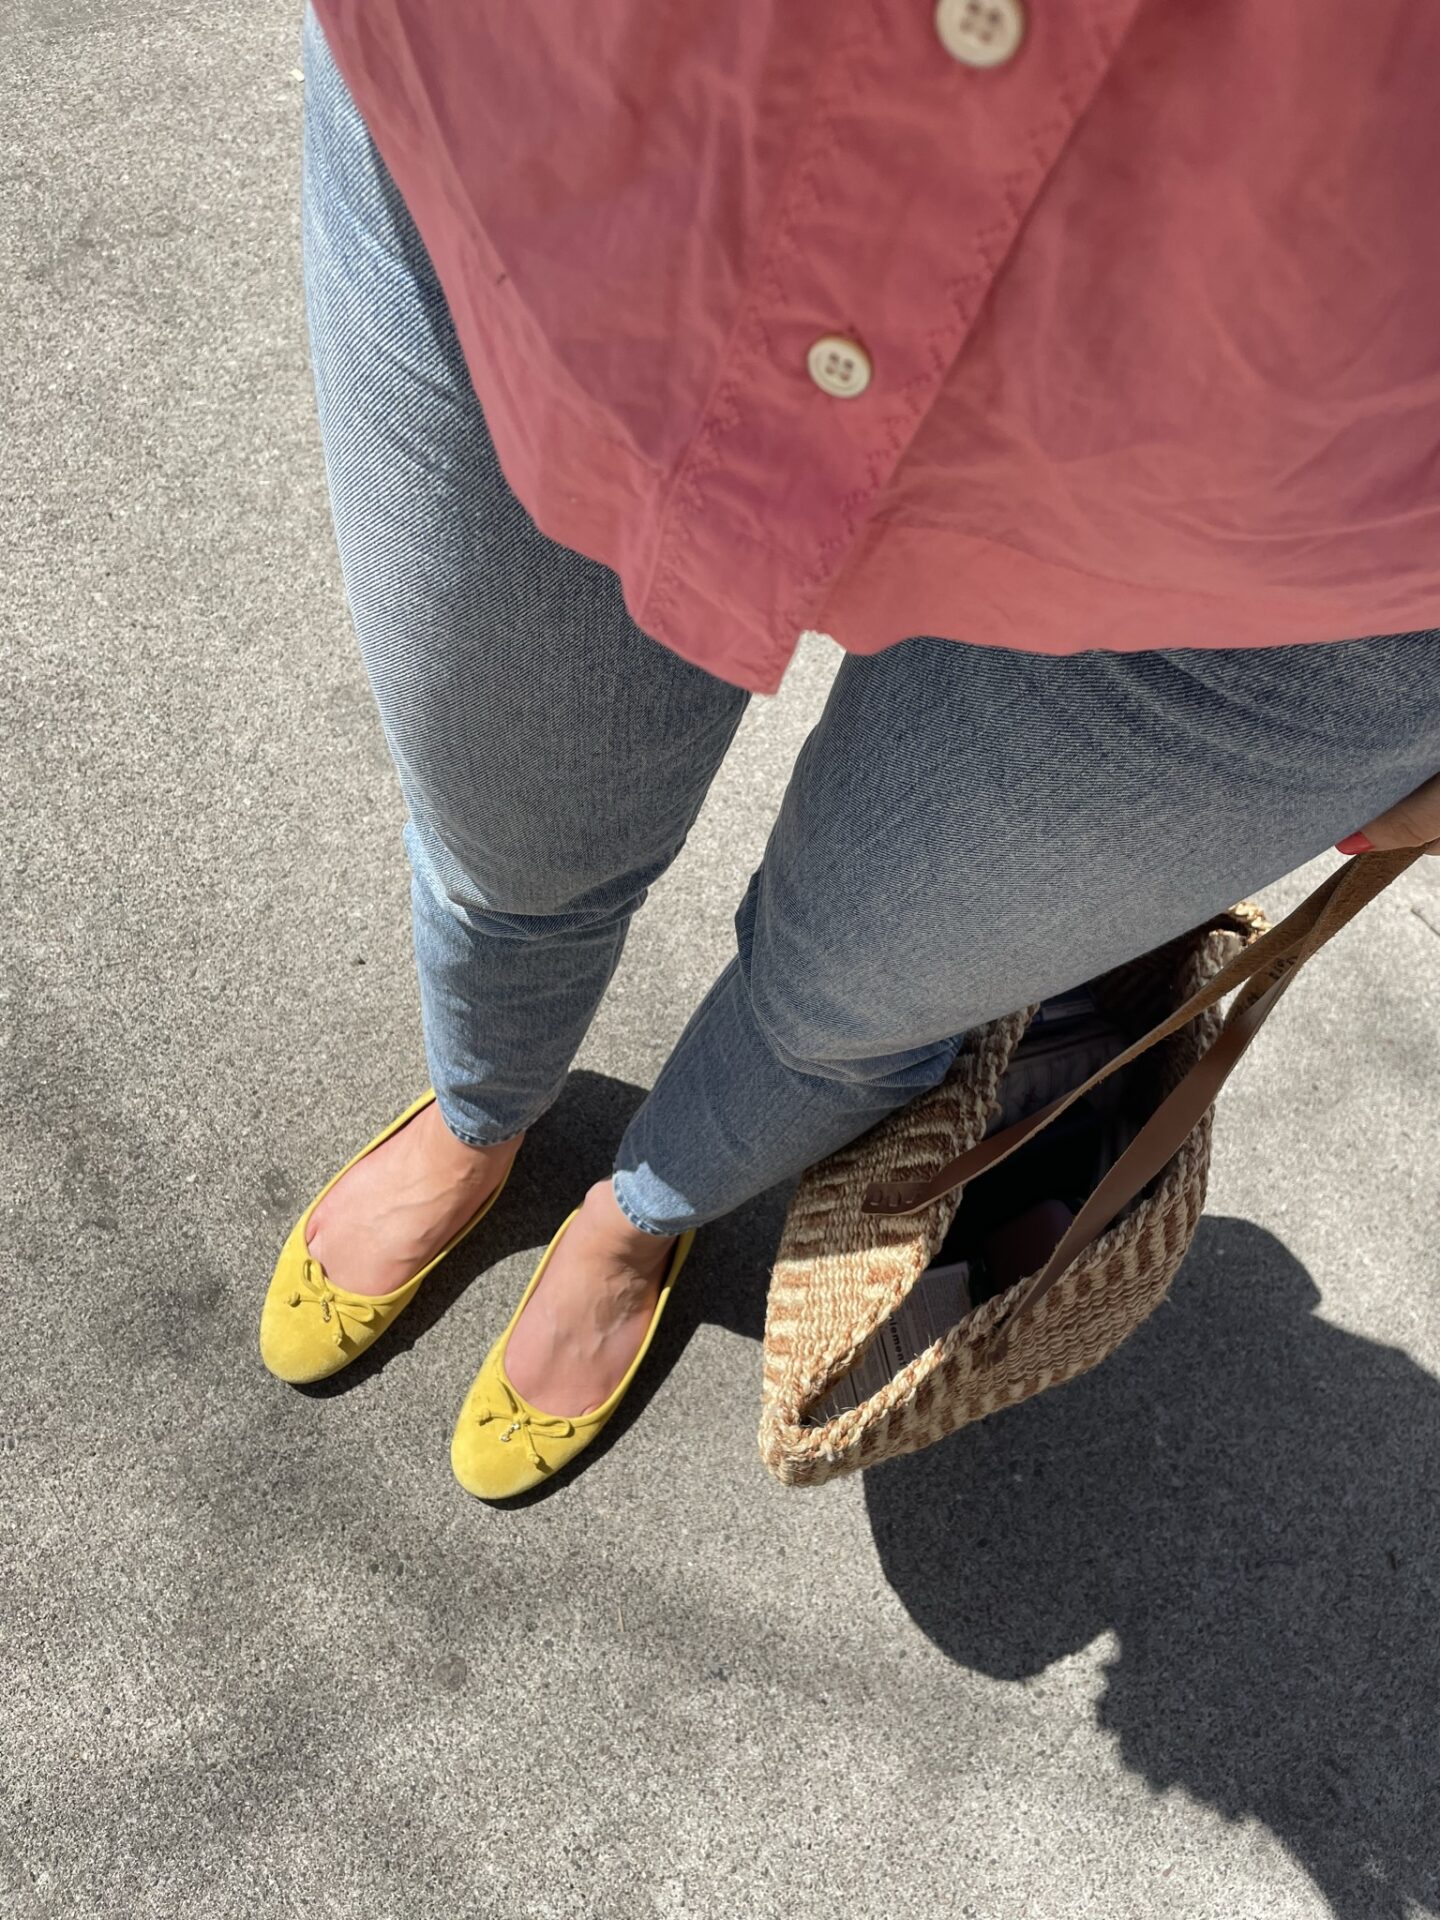 Karin Emily wears a yellow pair of flats from Sam Edelman